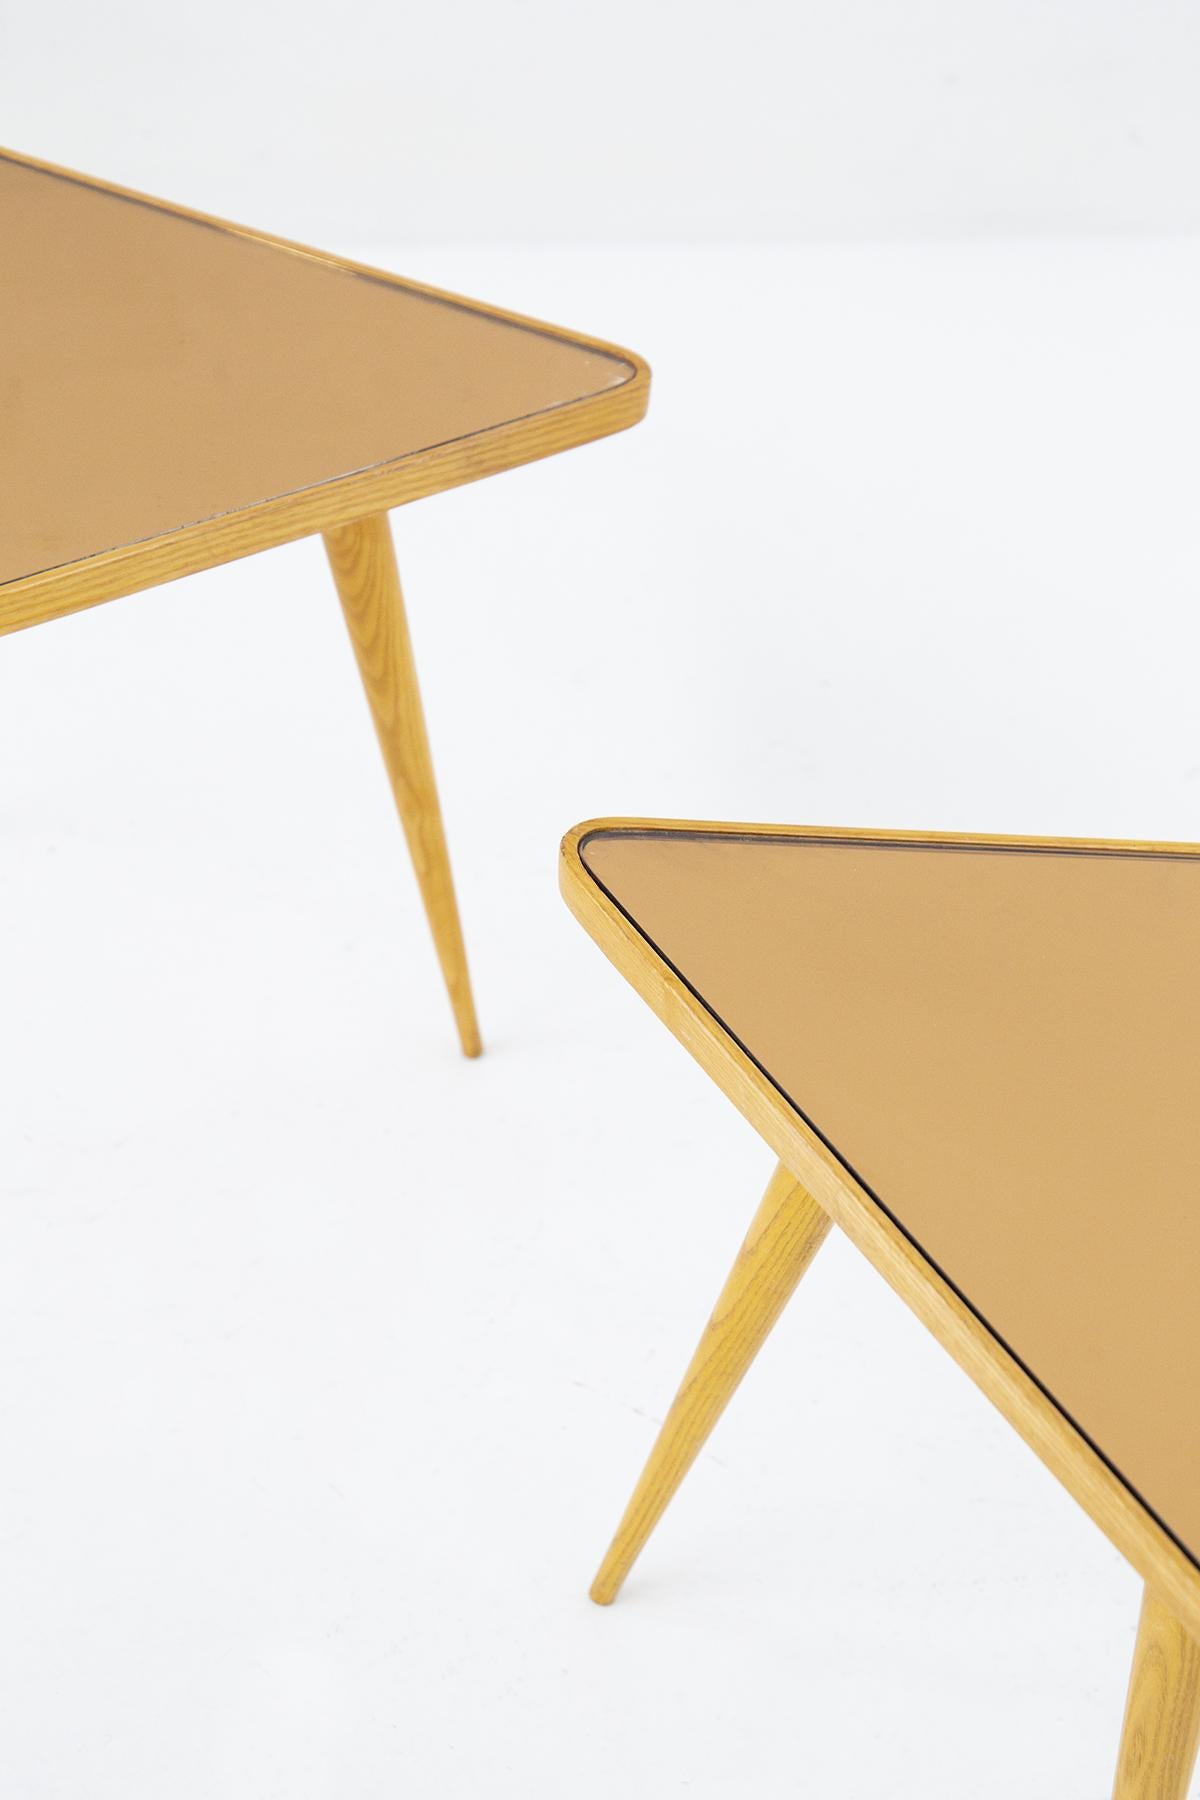 Very rare pair of triangular coffee tables designed by the great Paolo Buffa for Serafino Arrighi production, with surveyed drawing attesting to the authenticity of the piece. The small tables are very beautiful and distinctive, made entirely of a